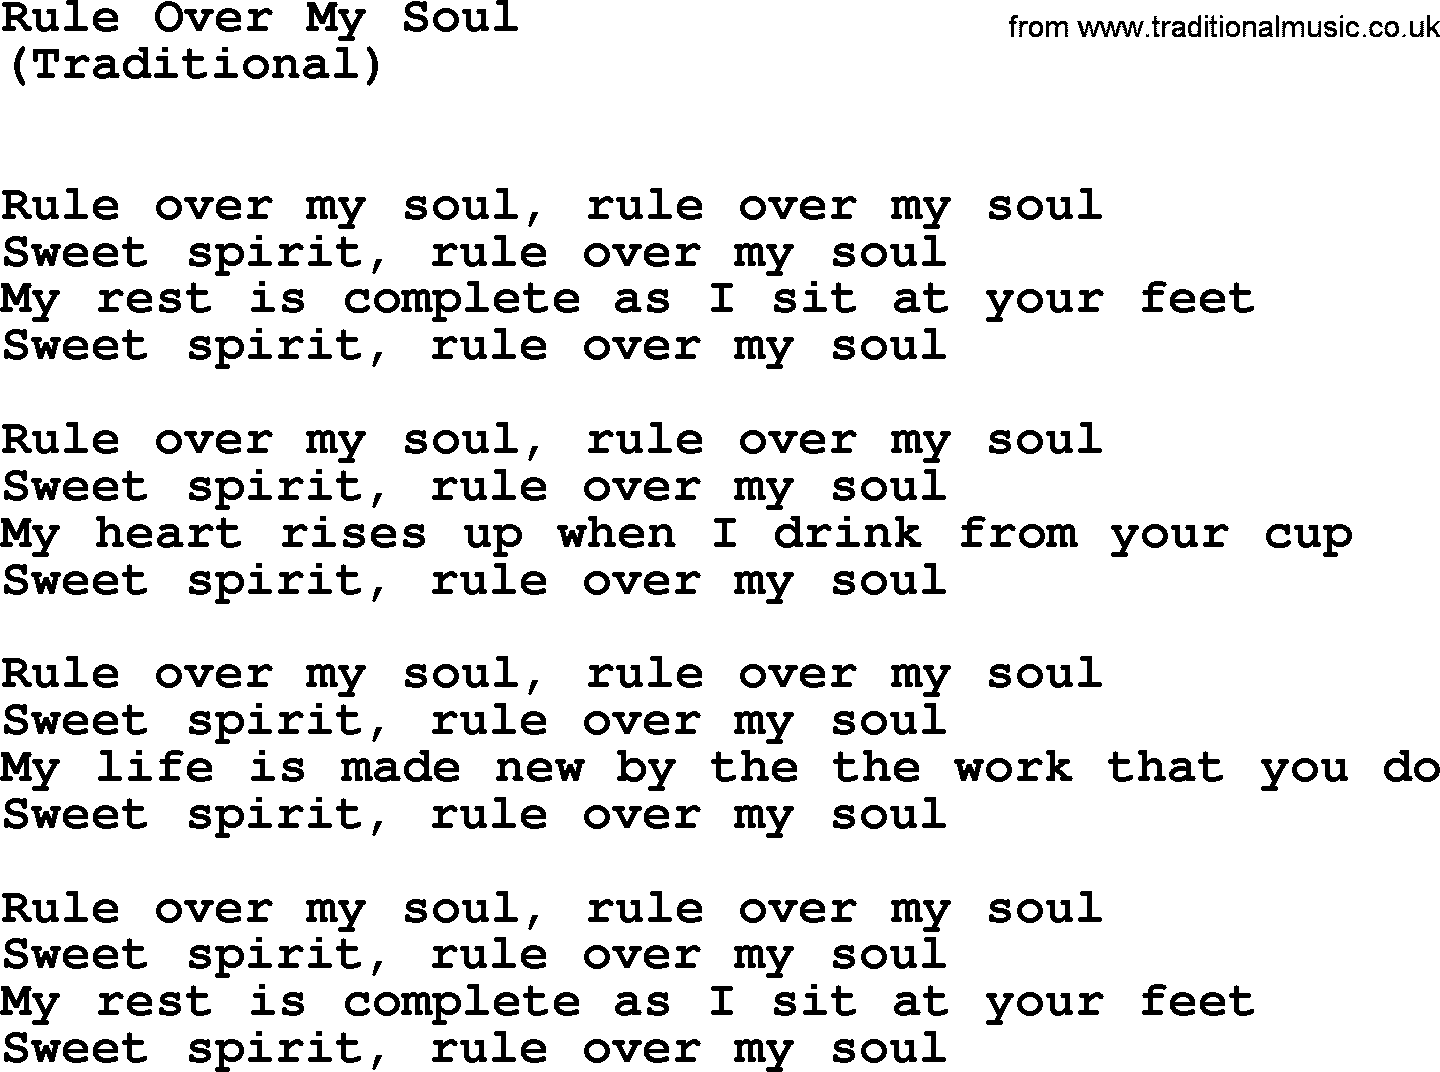 The Byrds song Rule Over My Soul, lyrics